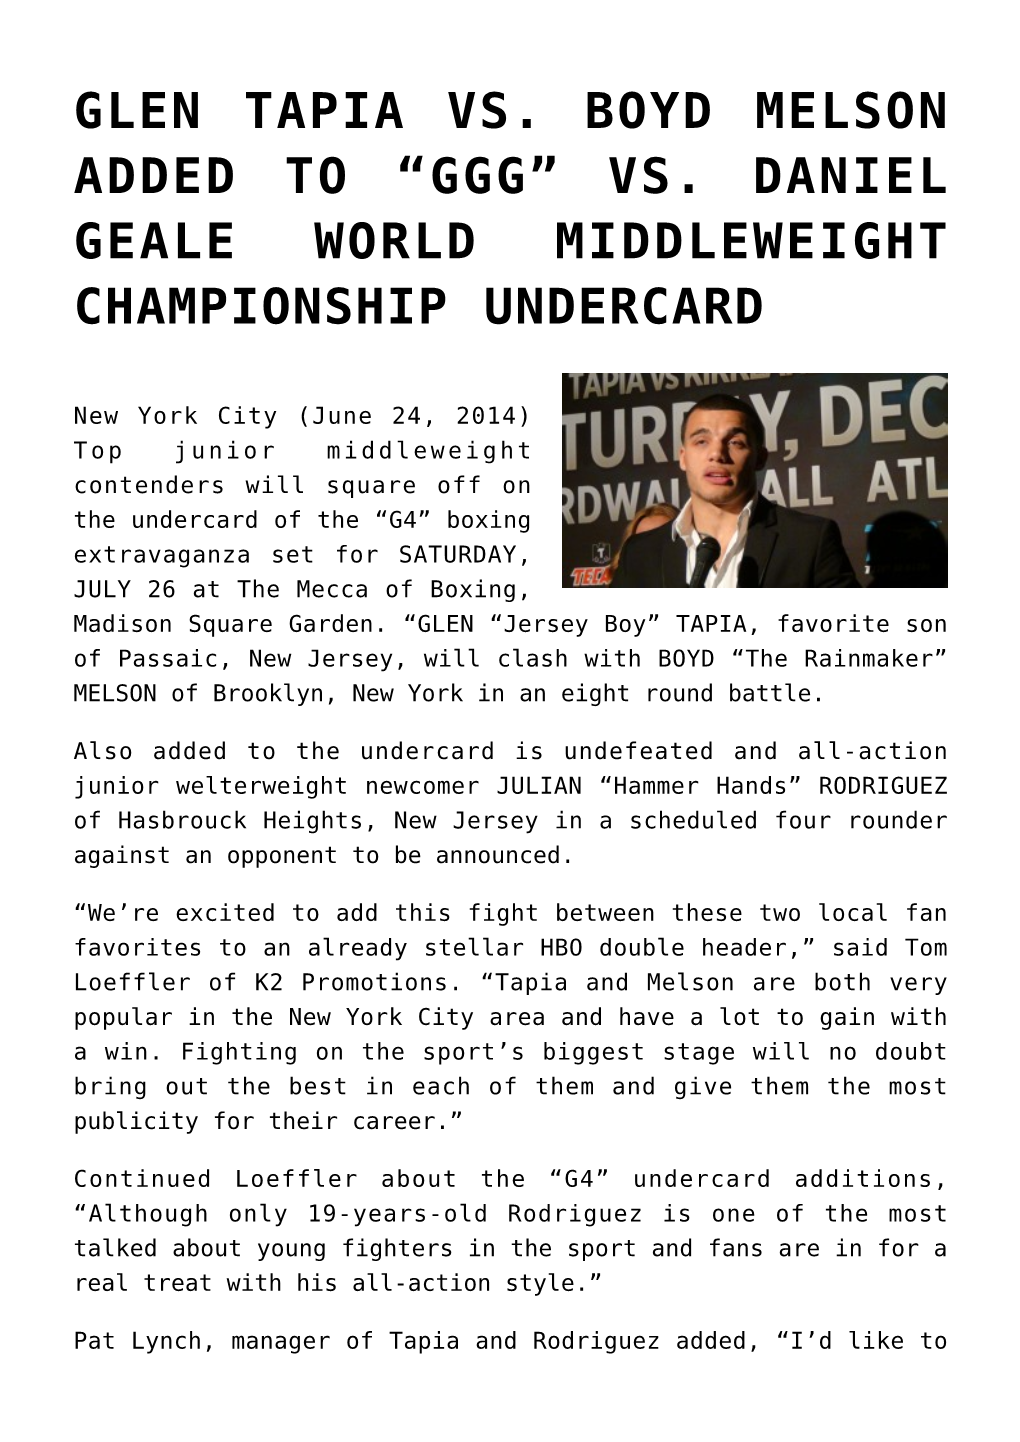 Glen Tapia Vs. Boyd Melson Added to “Ggg” Vs. Daniel Geale World Middleweight Championship Undercard